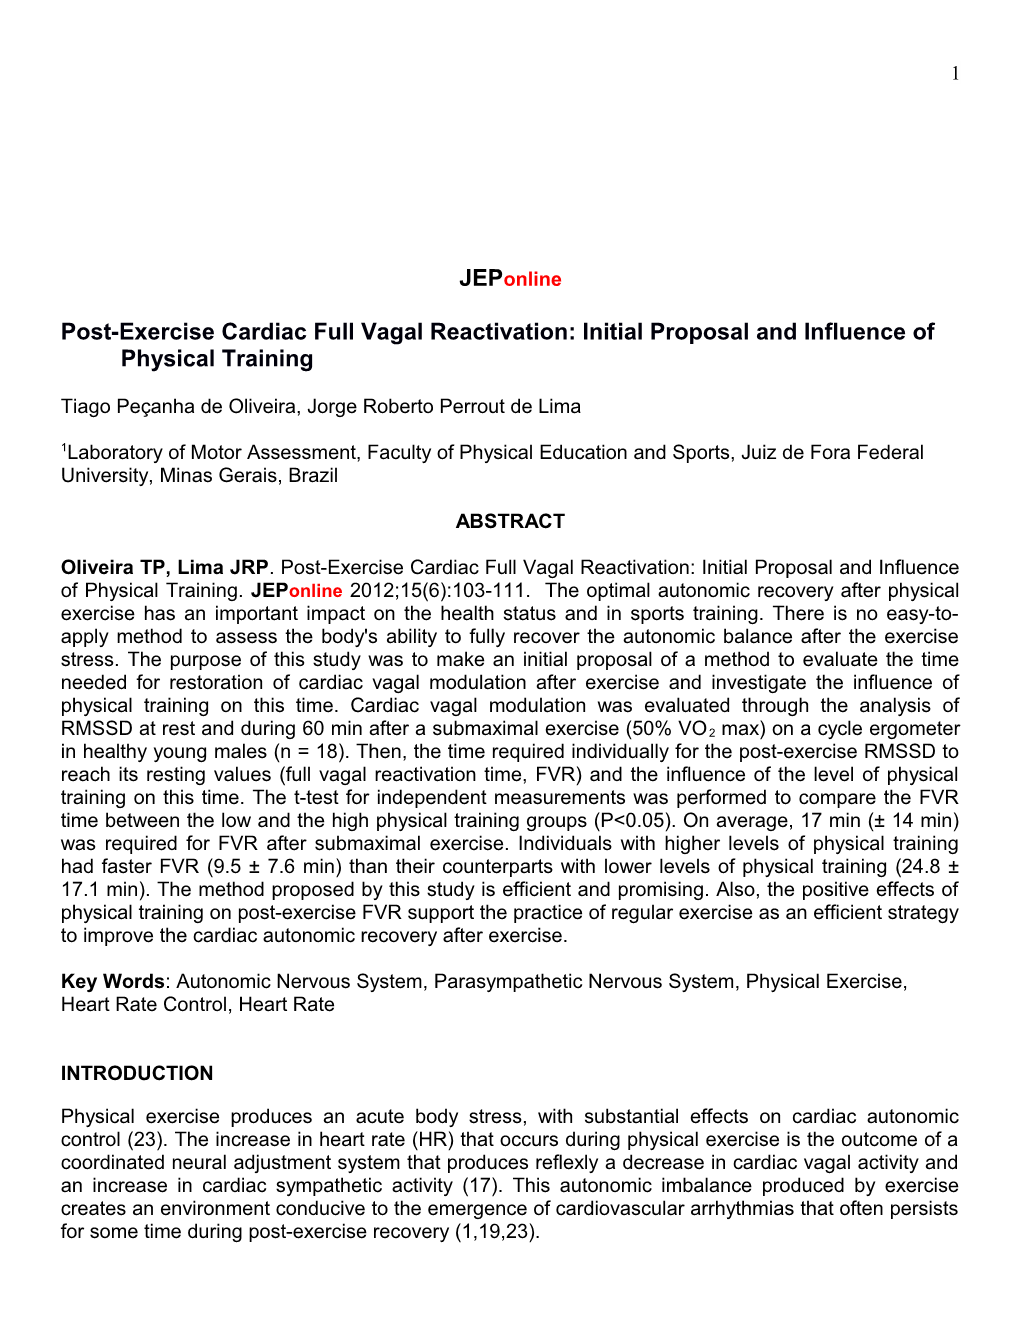 Post-Exercise Cardiac Full Vagal Reactivation: Initial Proposal and Influence of Physical